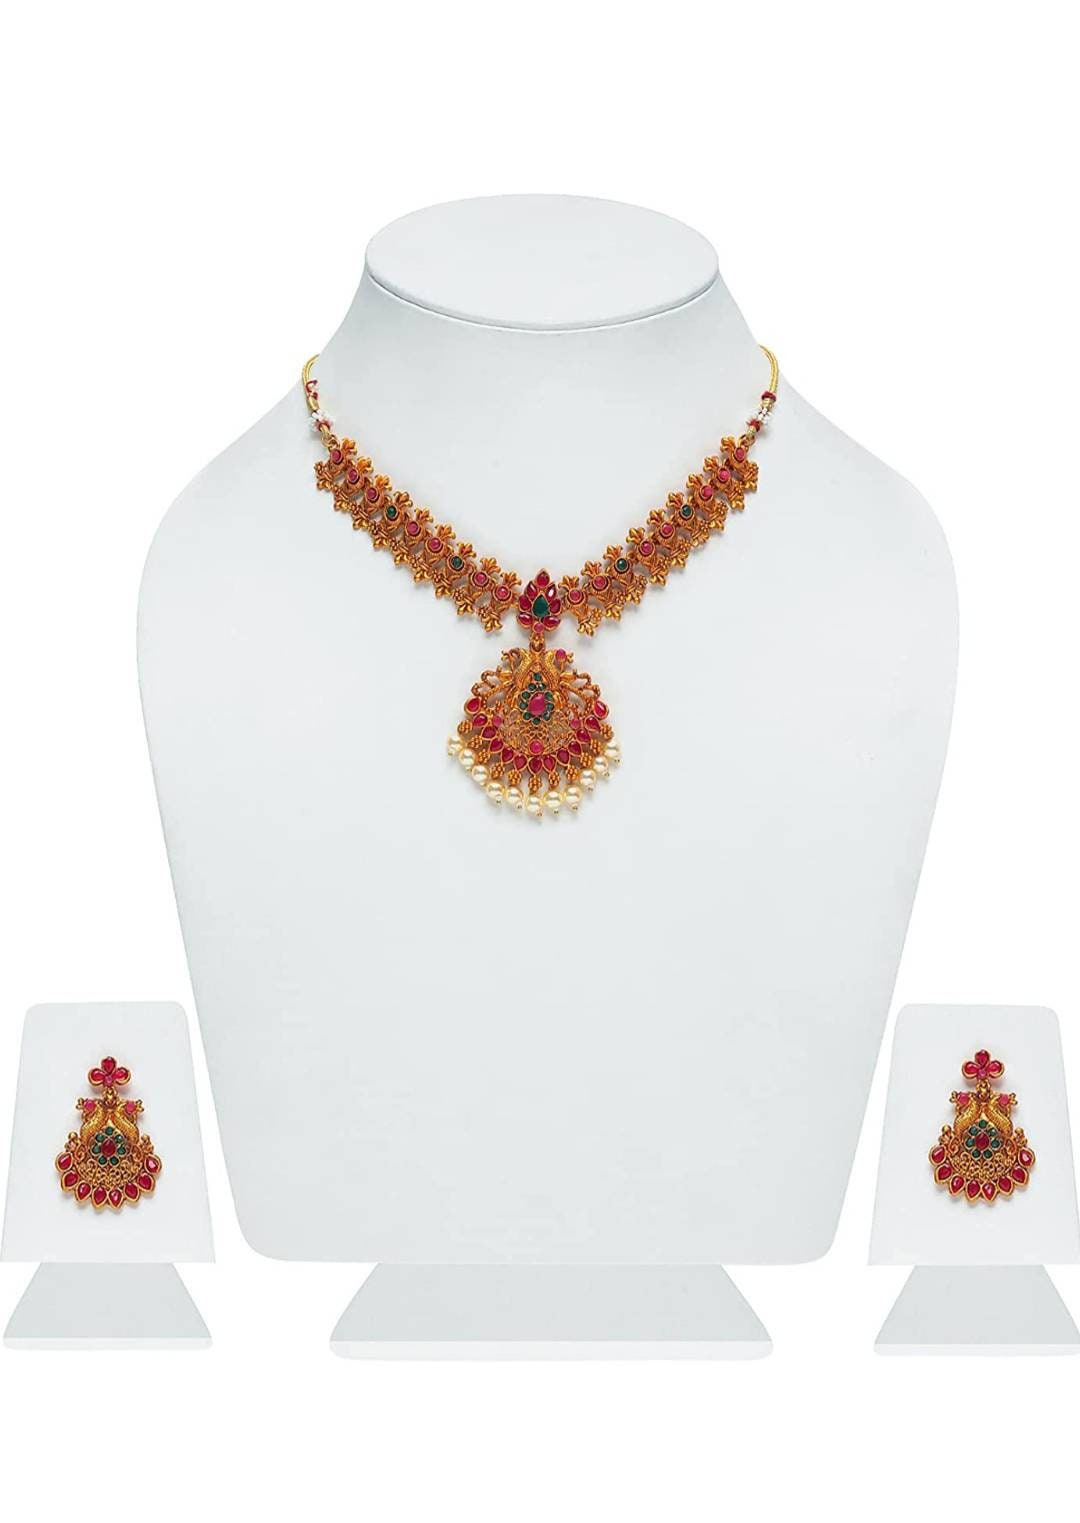 Beautiful Traditional Gold-plated Tample Jewellery Set /indian Women Jewellery Gold Plated Fashion Jewelry / Wedding Wear Bridal Set | Save 33% - Rajasthan Living 15